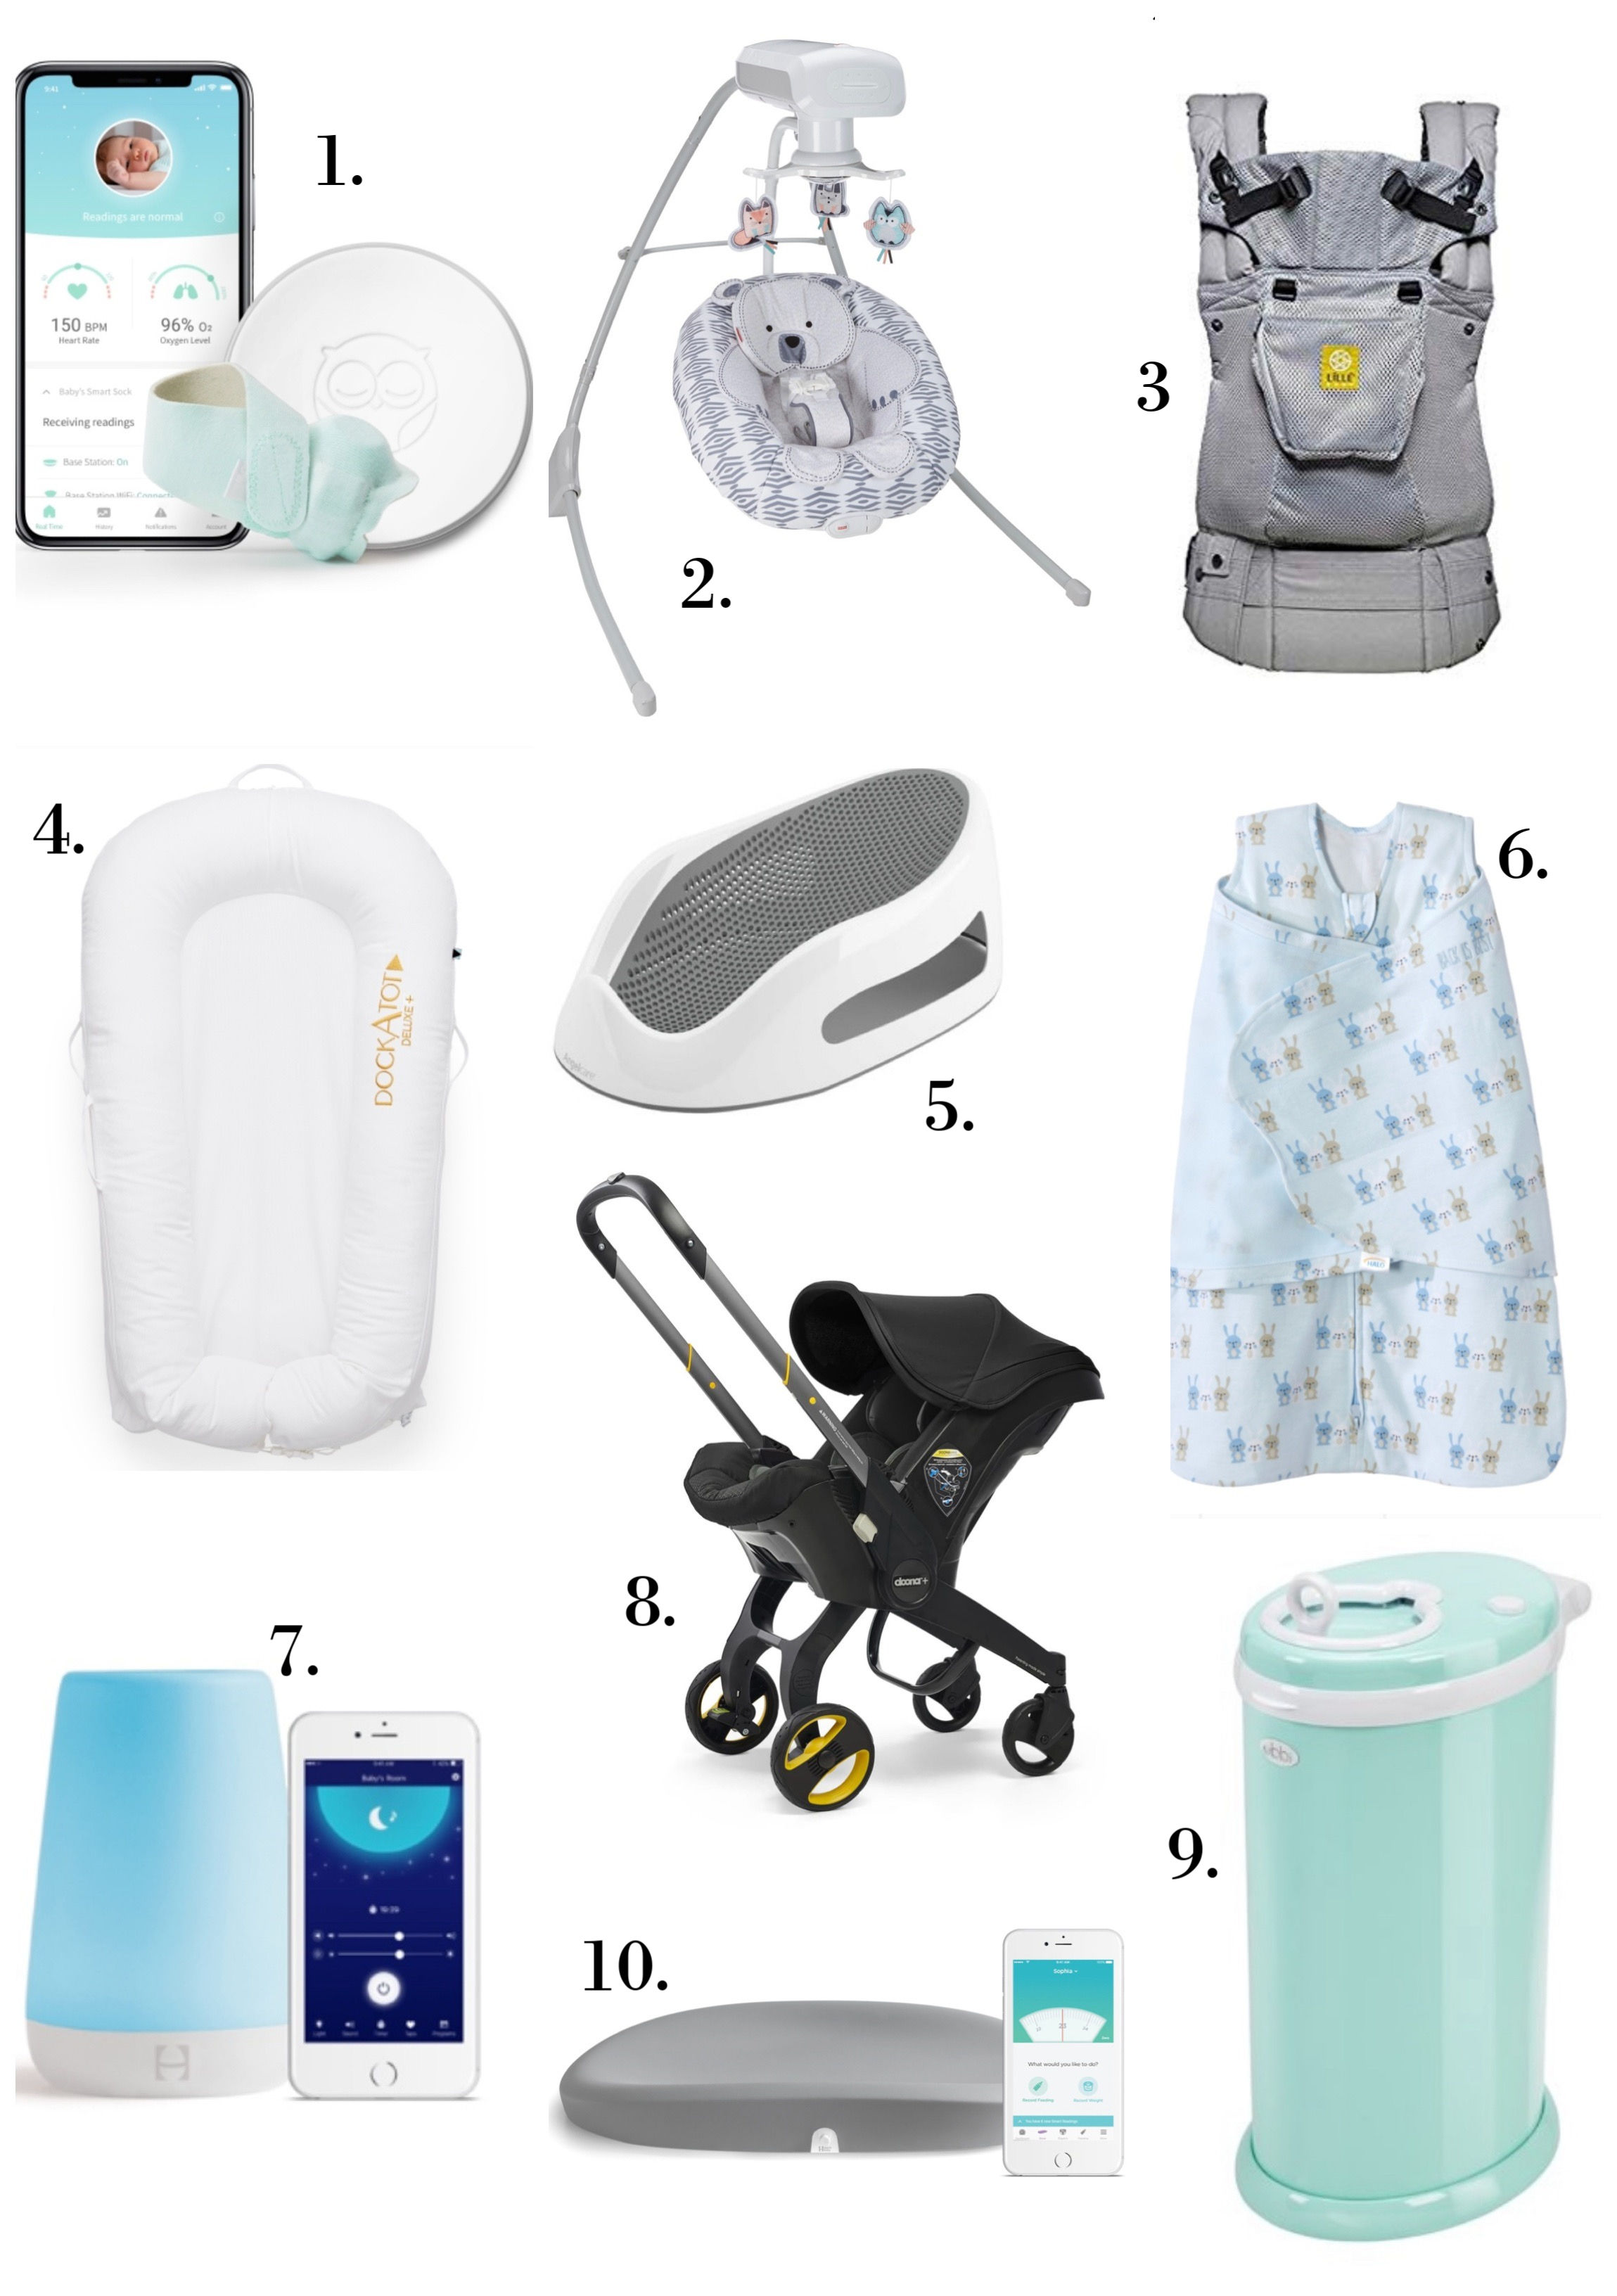 top baby must haves